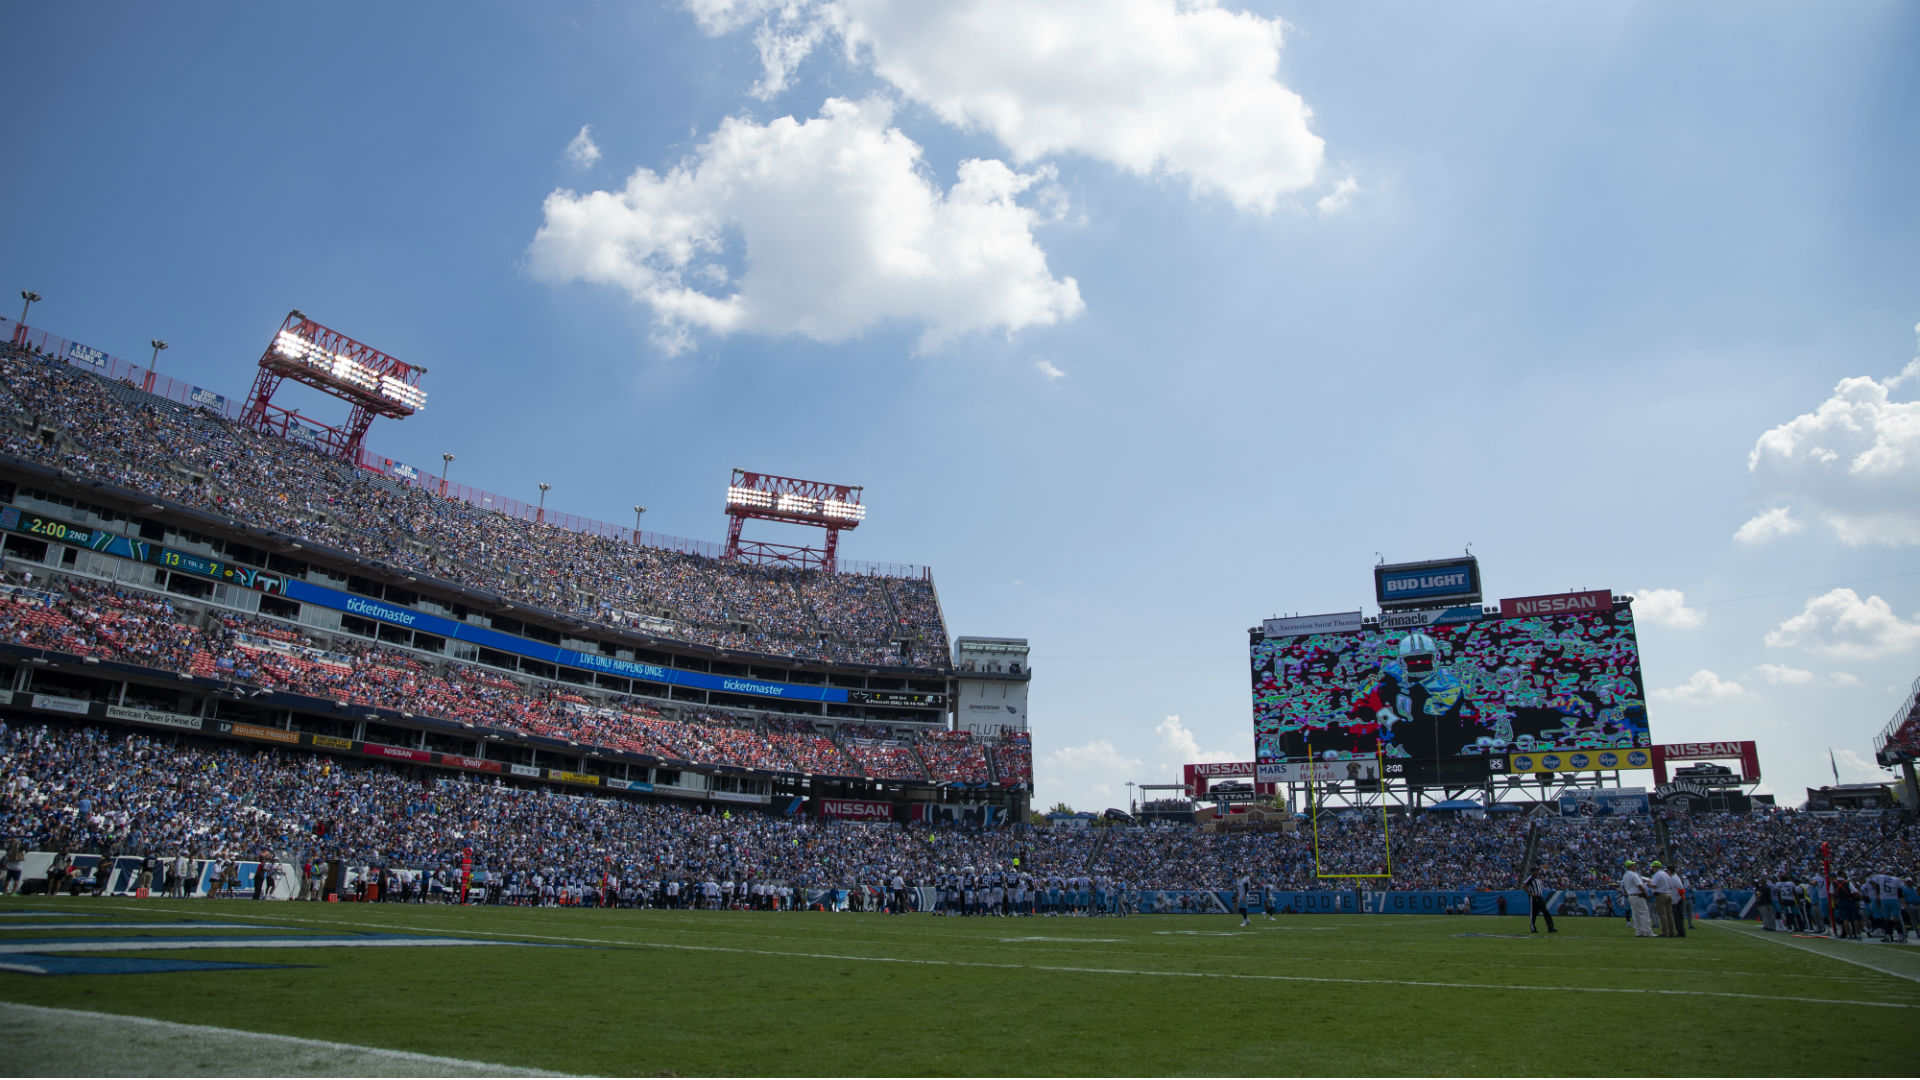 The Pittsburgh Steelers' Week 4 trip to the Tennessee Titans has become the first NFL game to be postponed by the coronavirus pandemic.